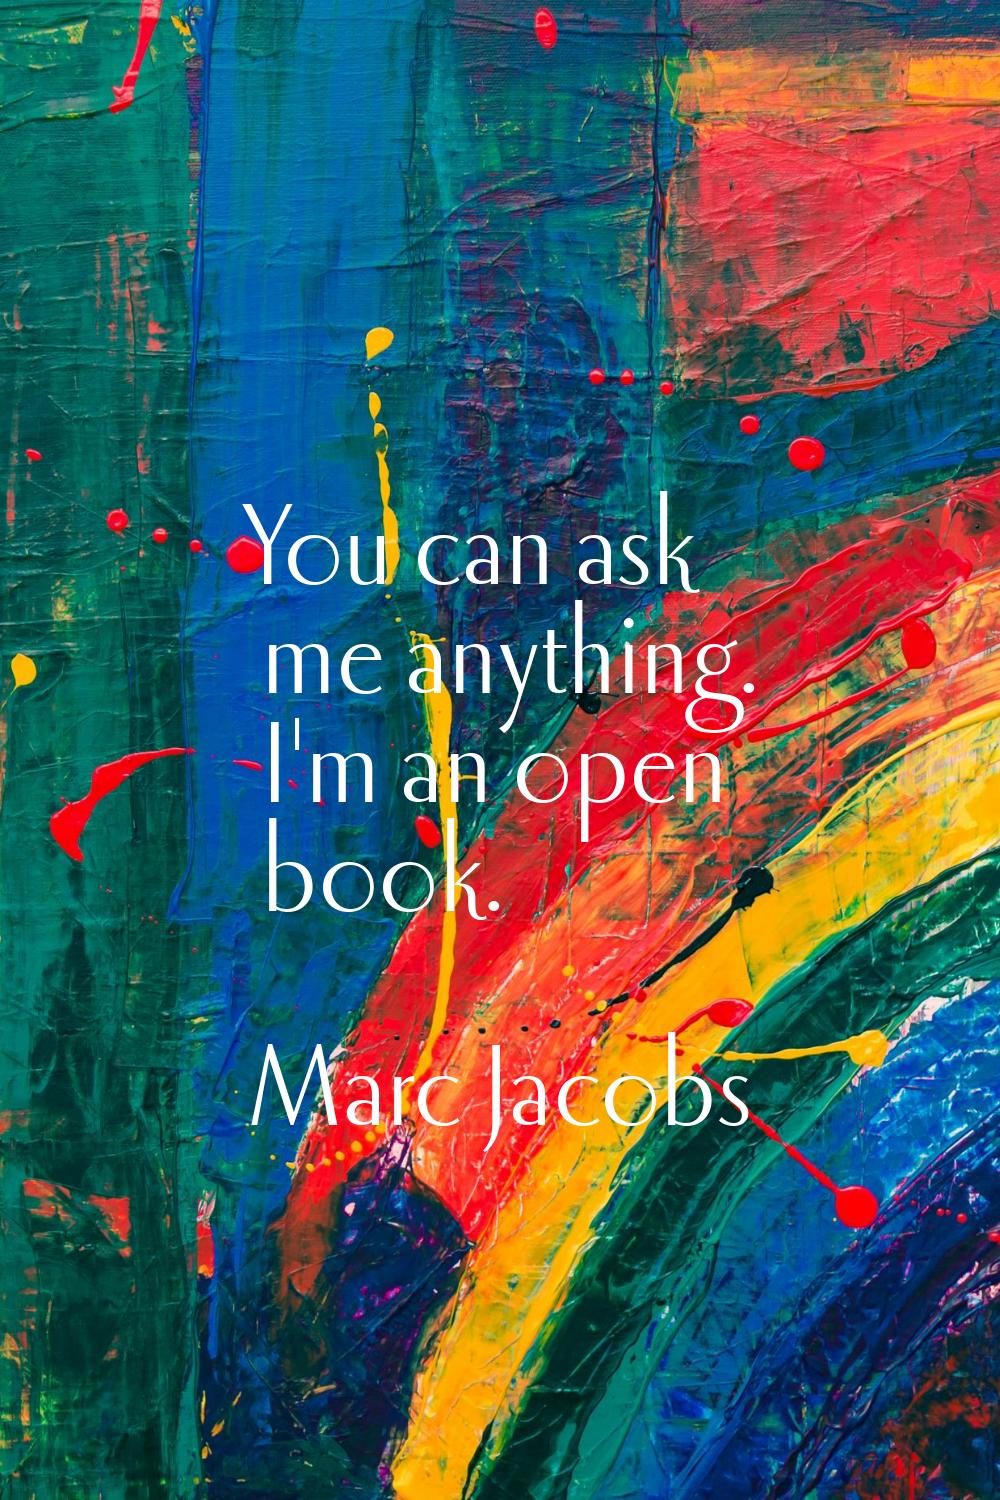 You can ask me anything. I'm an open book.